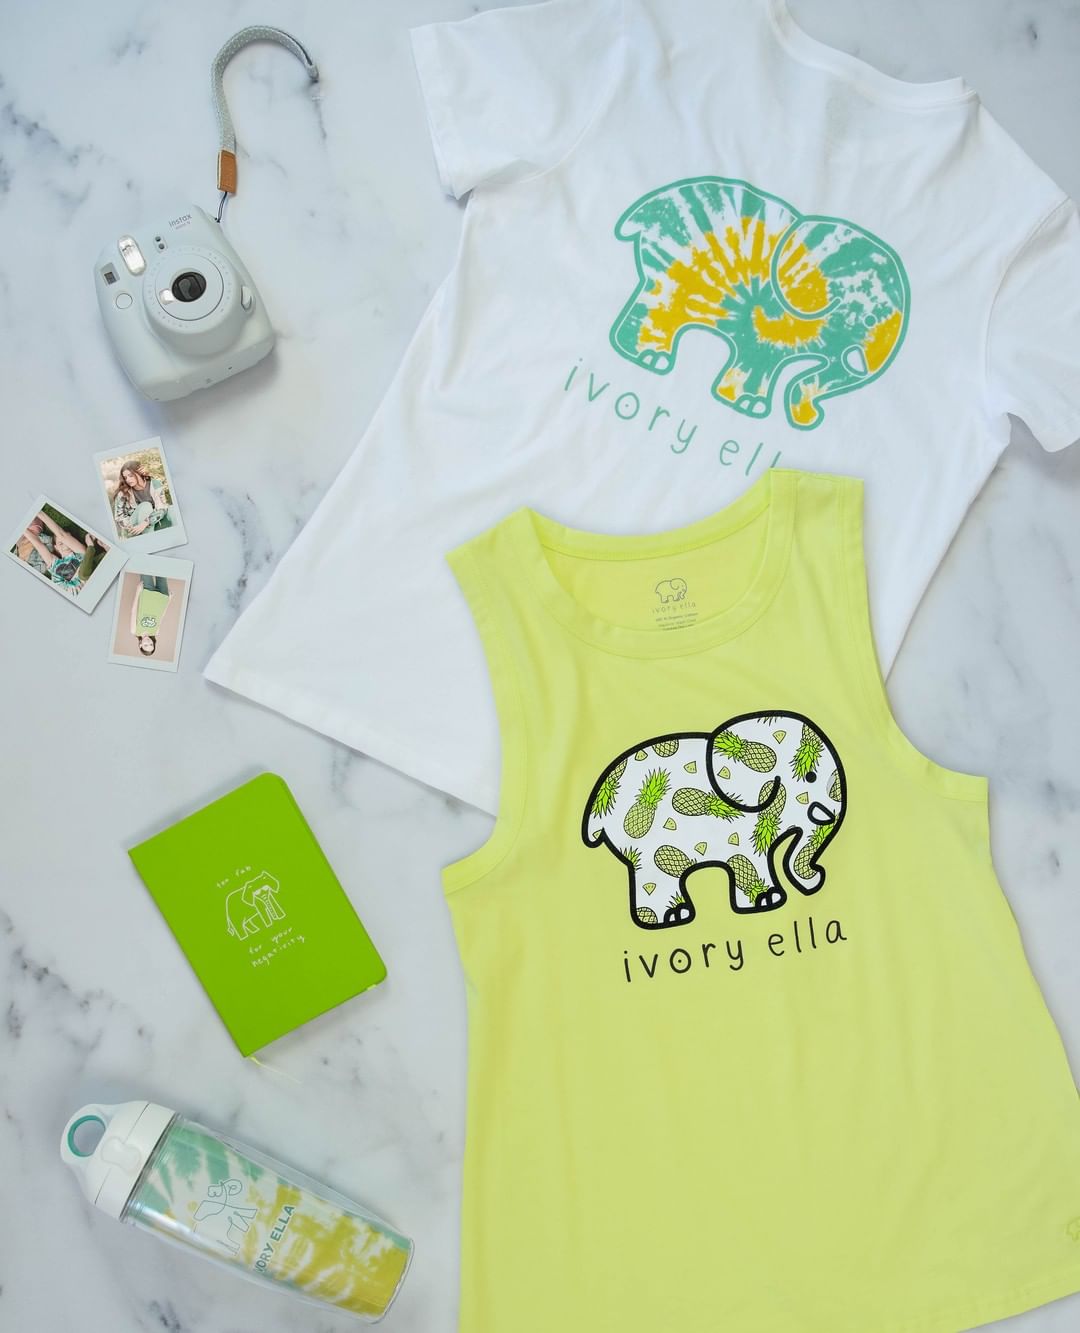 Ivory Ella - We are obsessed with these new patterns! 🐘💚 HBU? #SaveTheElephants #IEforMe⁠